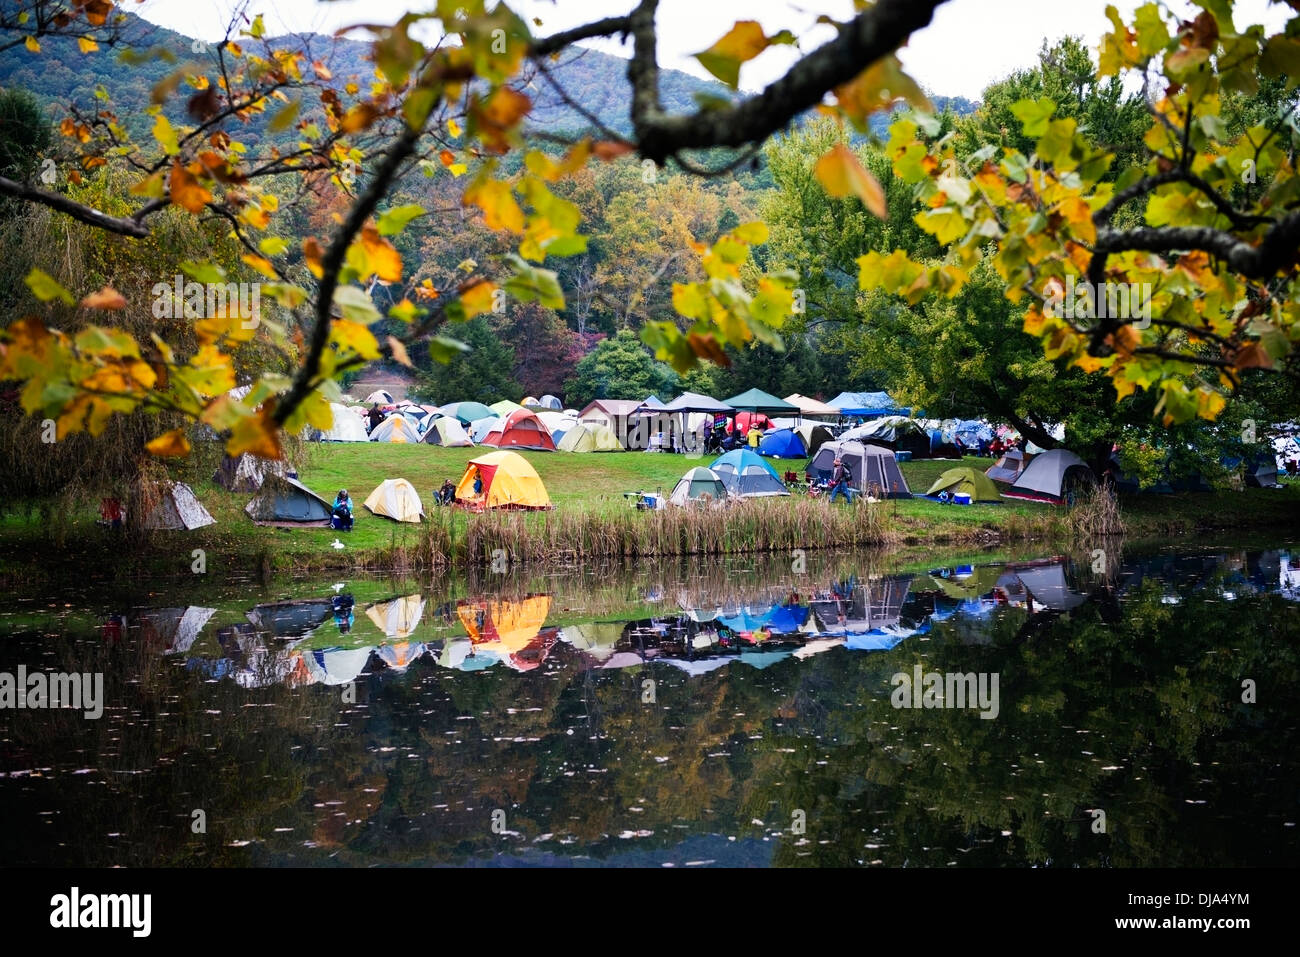 Campers tents along the lake at The Leaf Festival (Lake Eden Arts Festival), Black Mountain North Carolina. Stock Photo